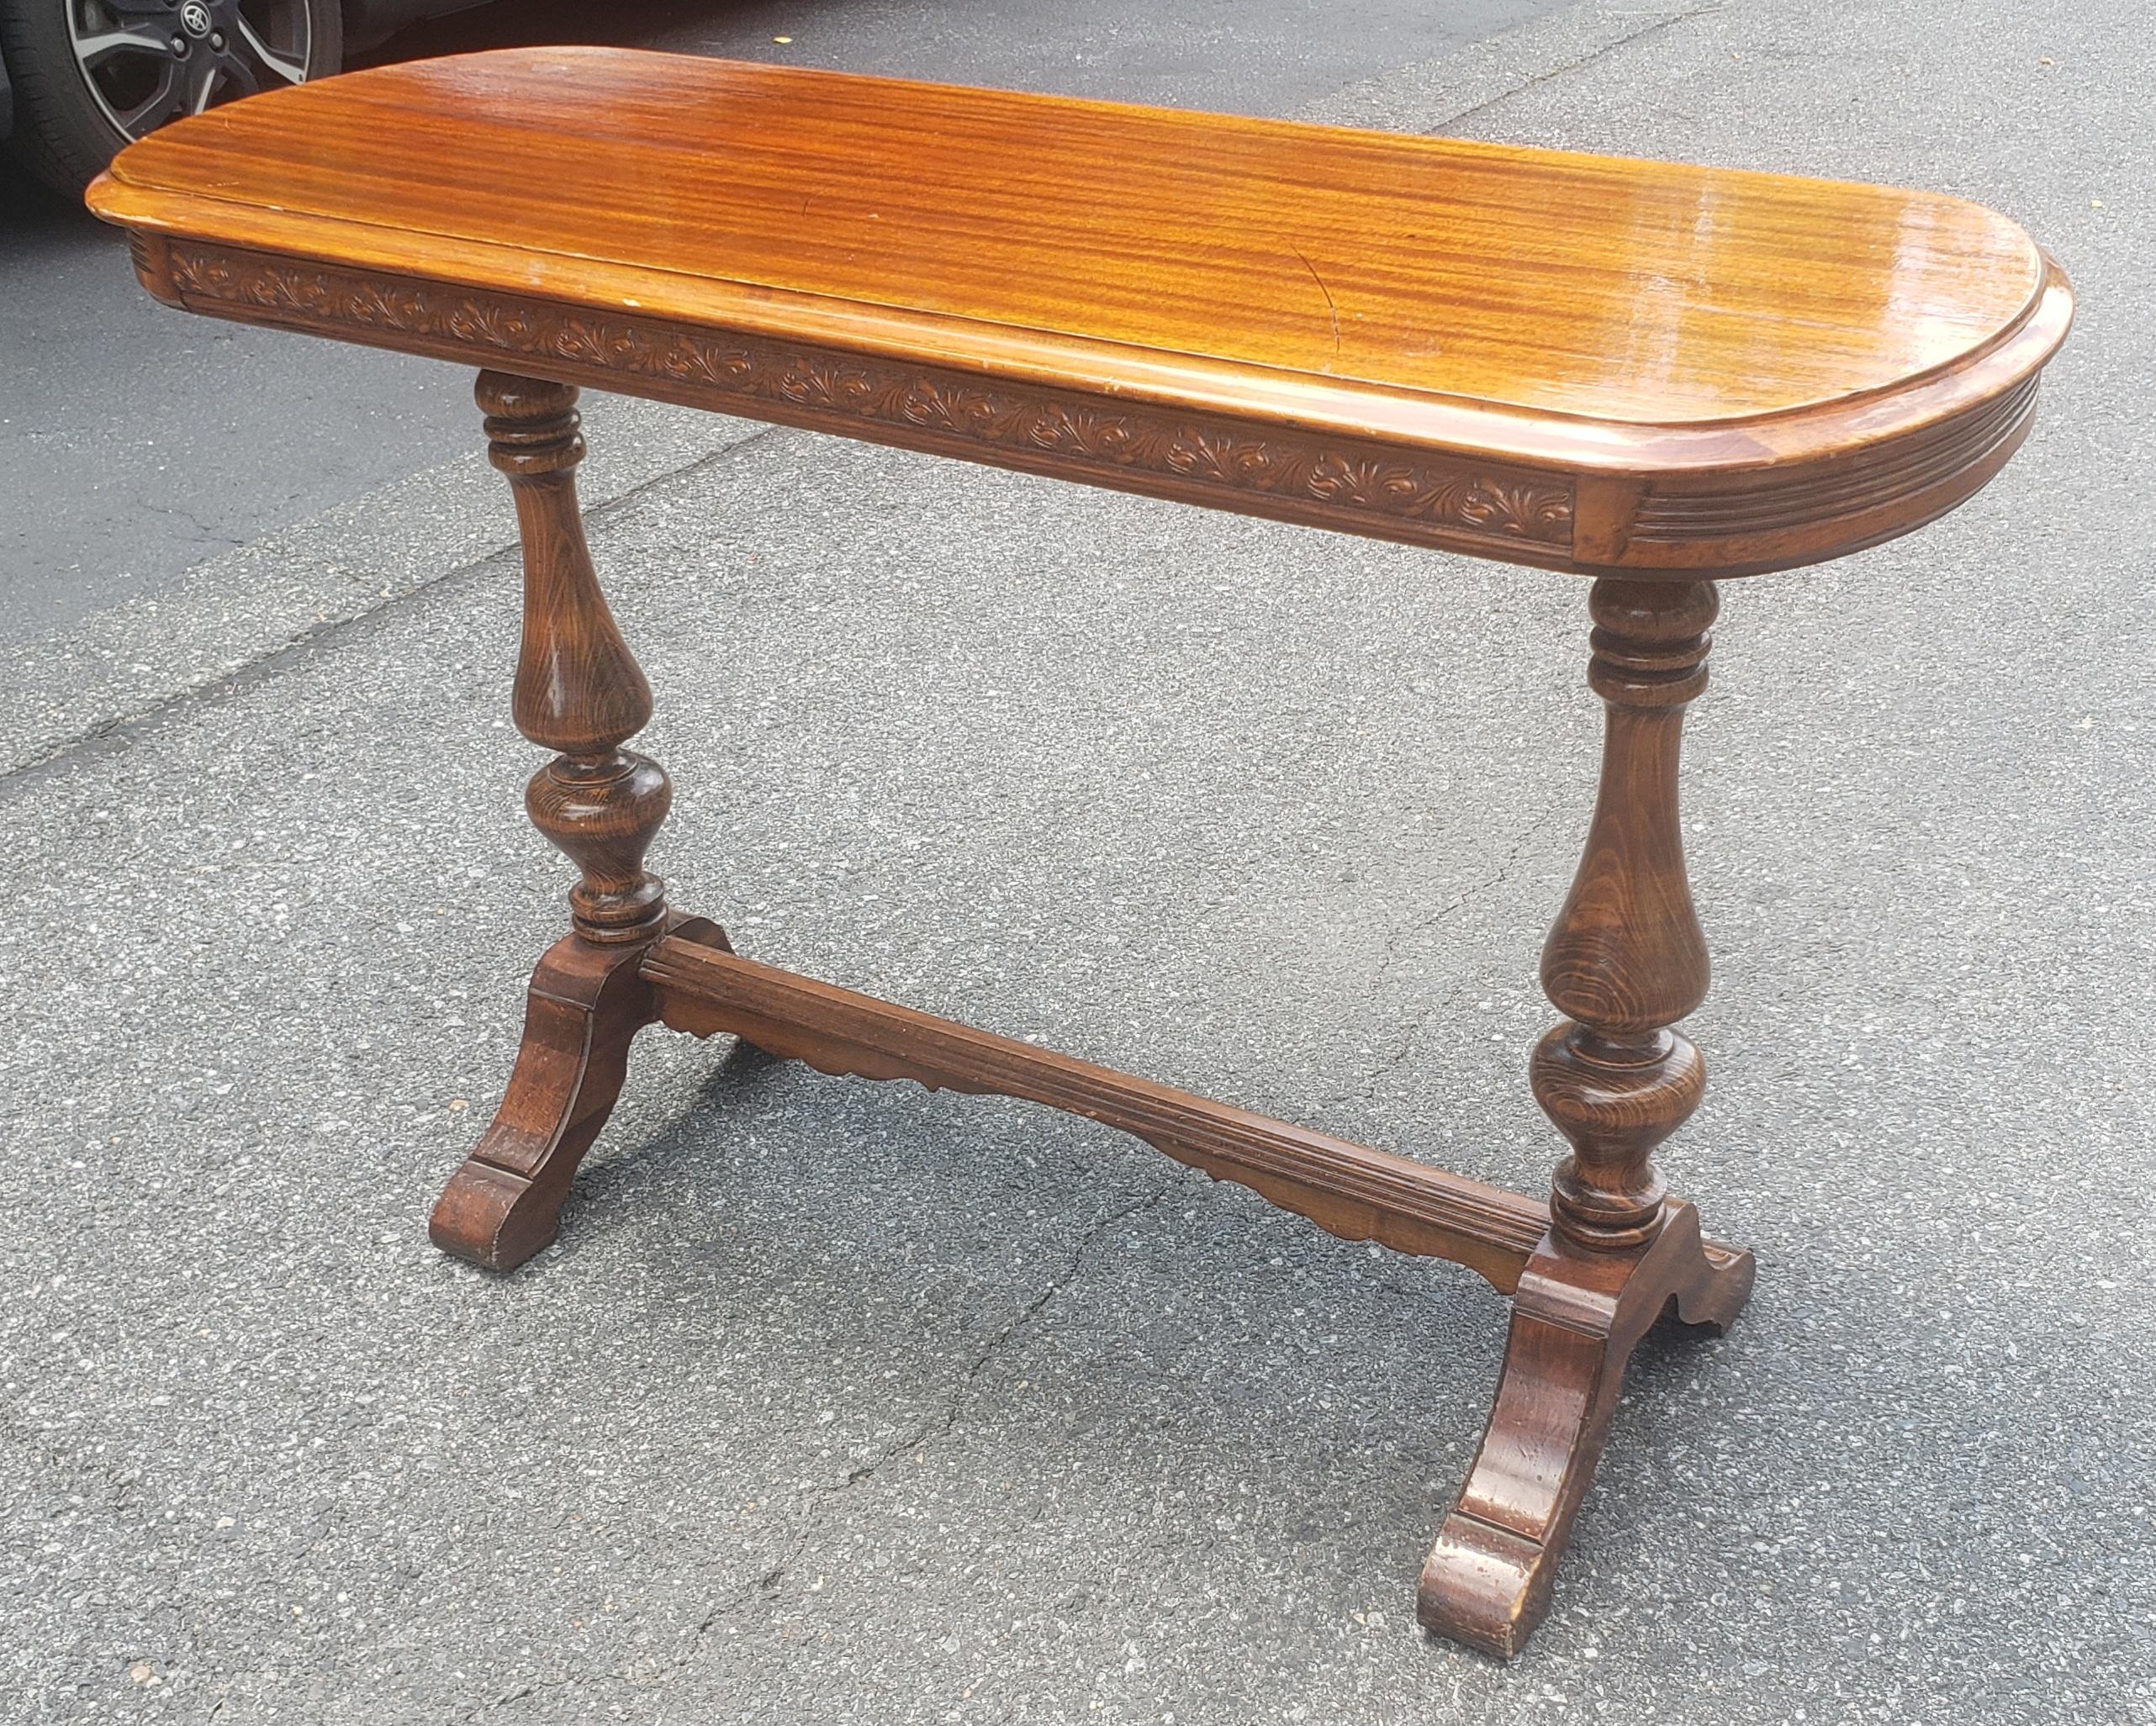 Brandt Furniture Rococo Style Mahogany Trestle Console Table, circa 1940s
Recently refinished, glossy finish. Measures 47